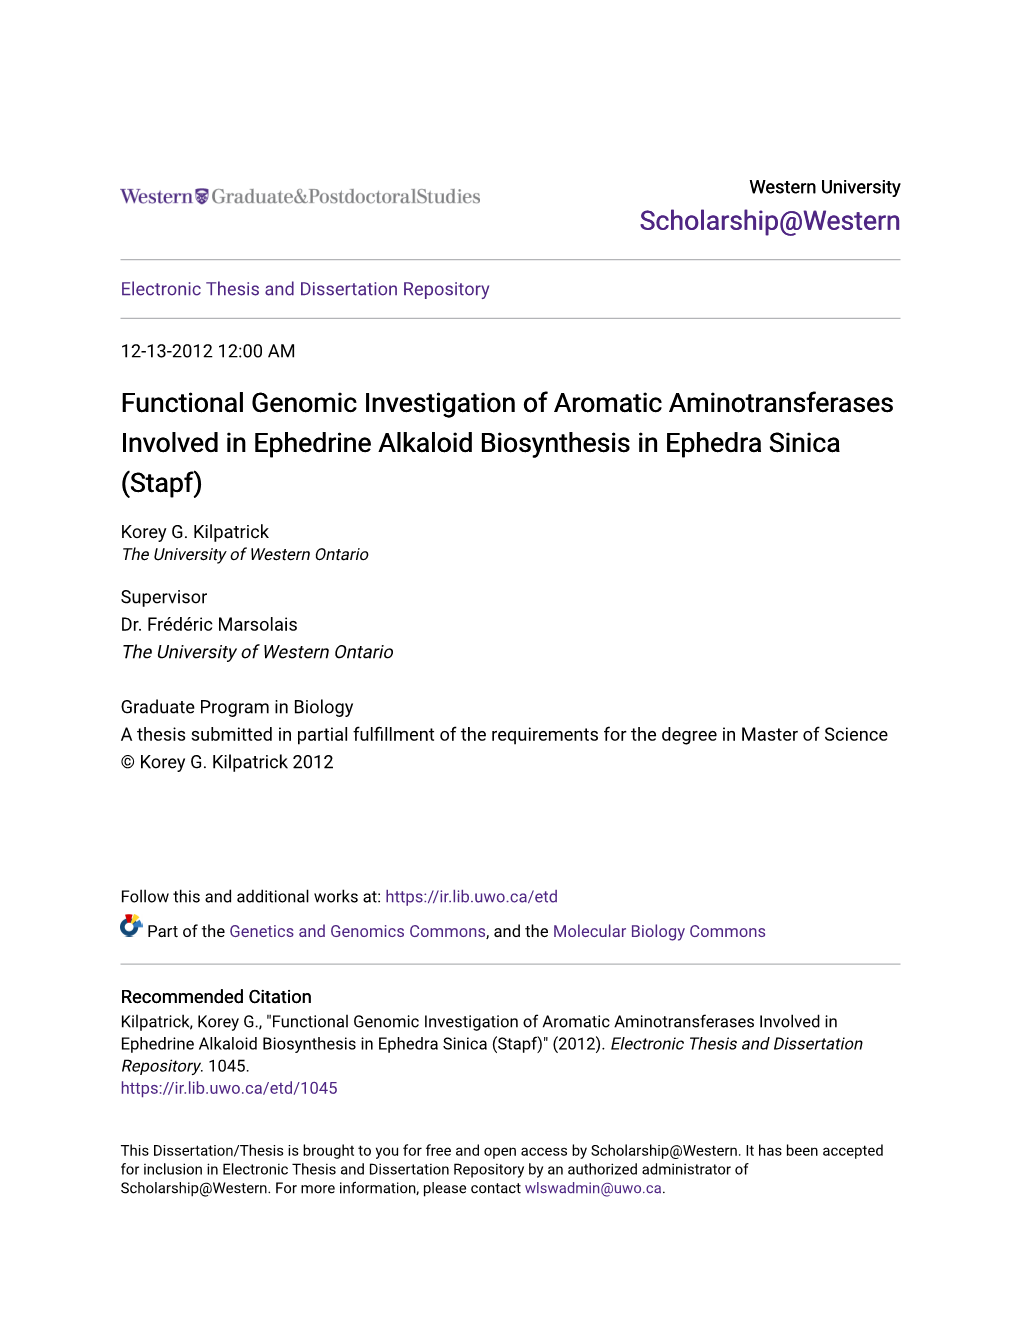 Functional Genomic Investigation of Aromatic Aminotransferases Involved in Ephedrine Alkaloid Biosynthesis in Ephedra Sinica (Stapf)